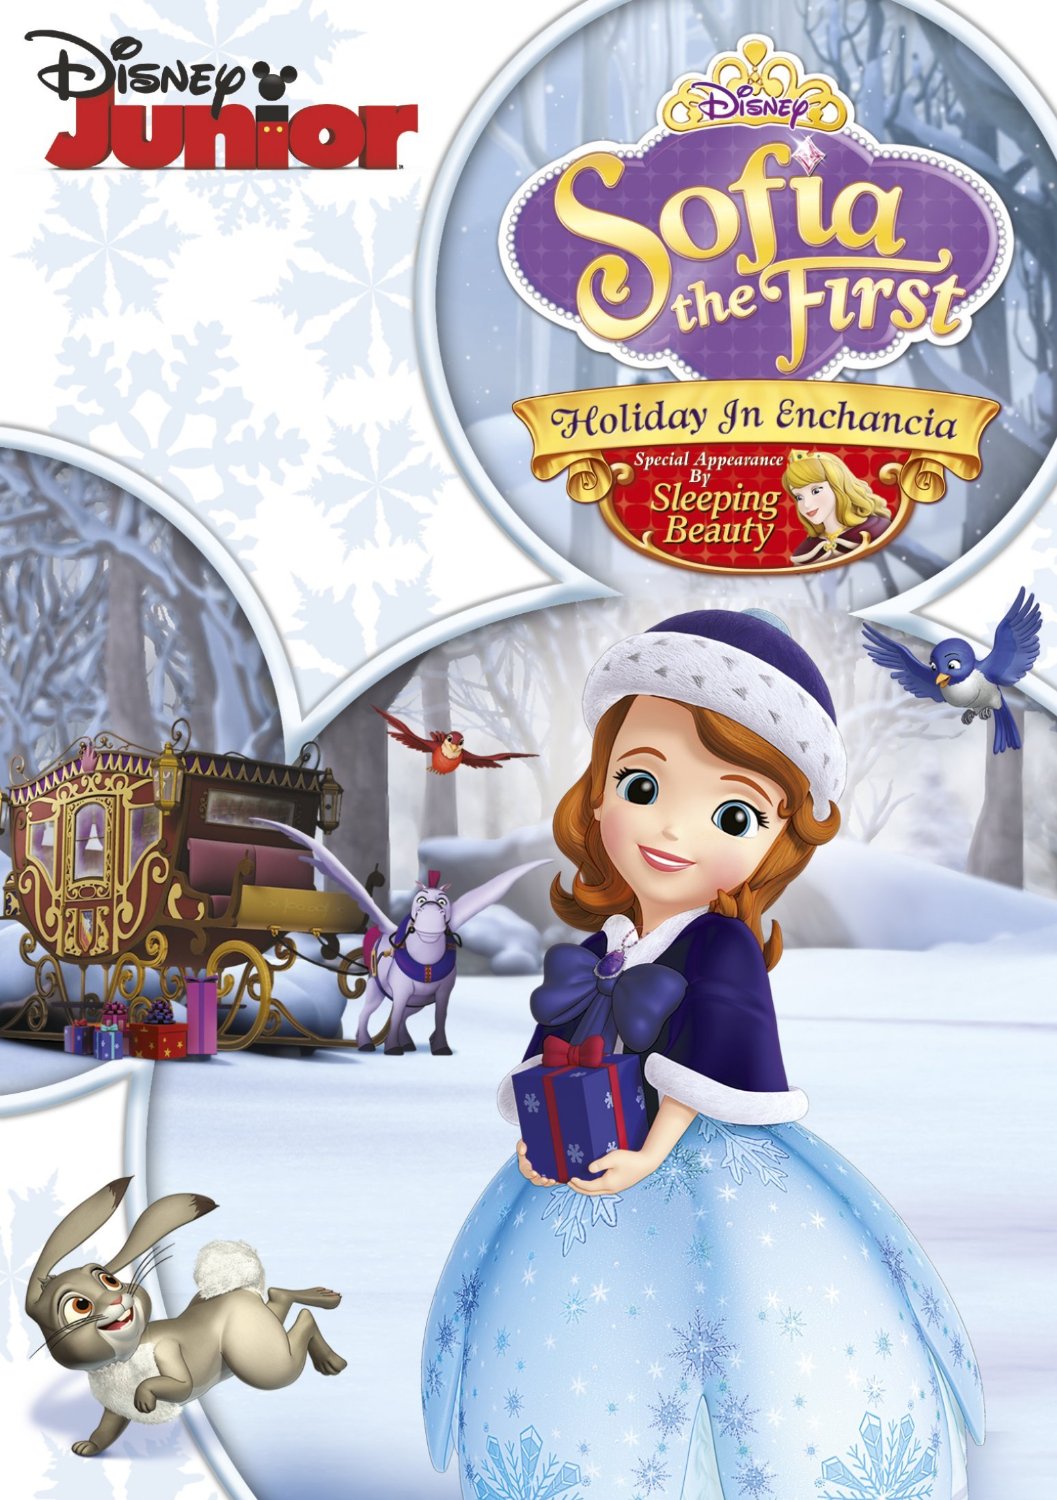 Sofia The First: Holiday In Enchancia (DVD)